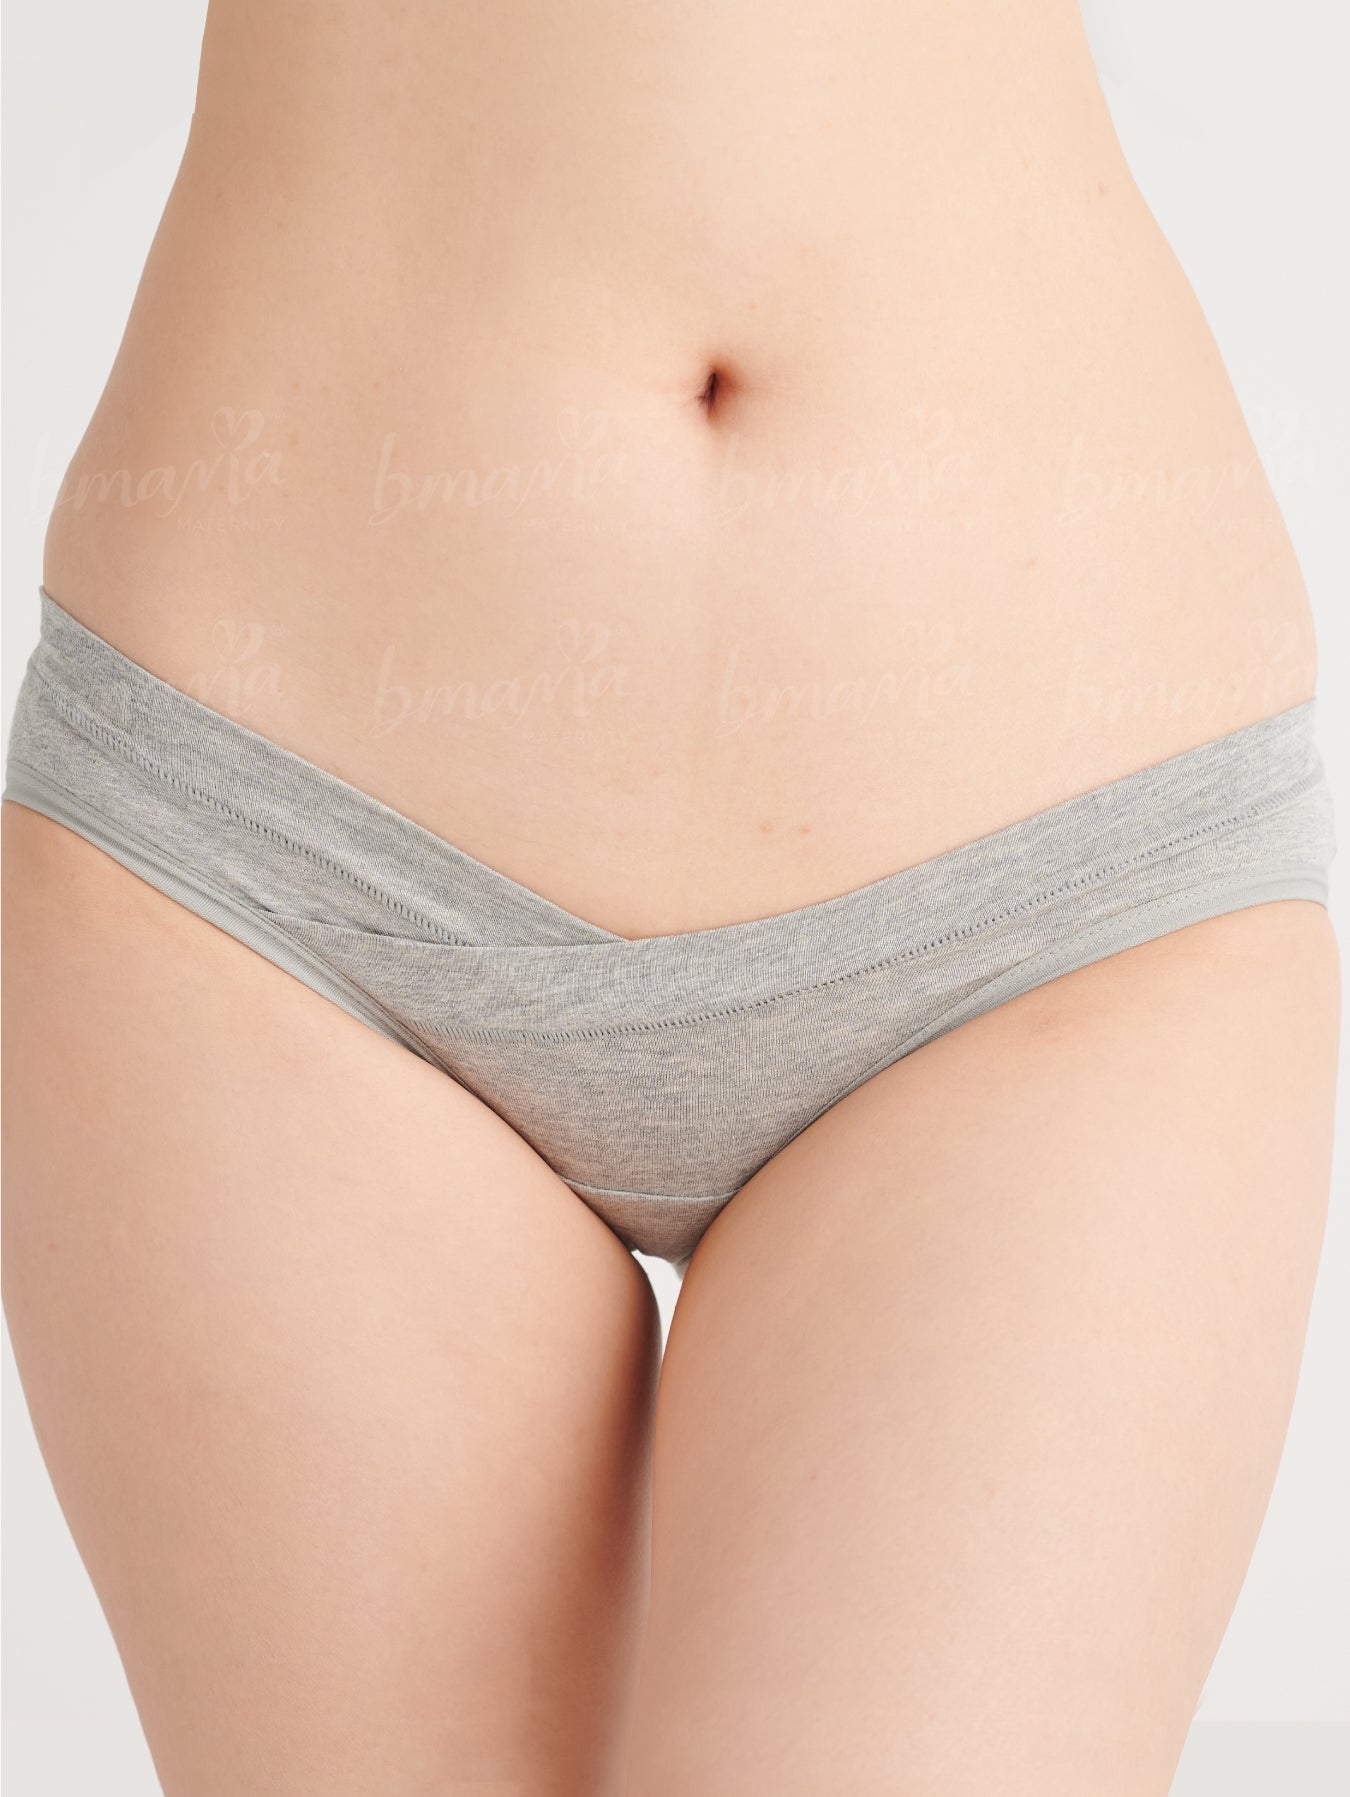 Elevate your Maternity Experience with bmama Maternity Panties - Comfort &  Support in Every Wear